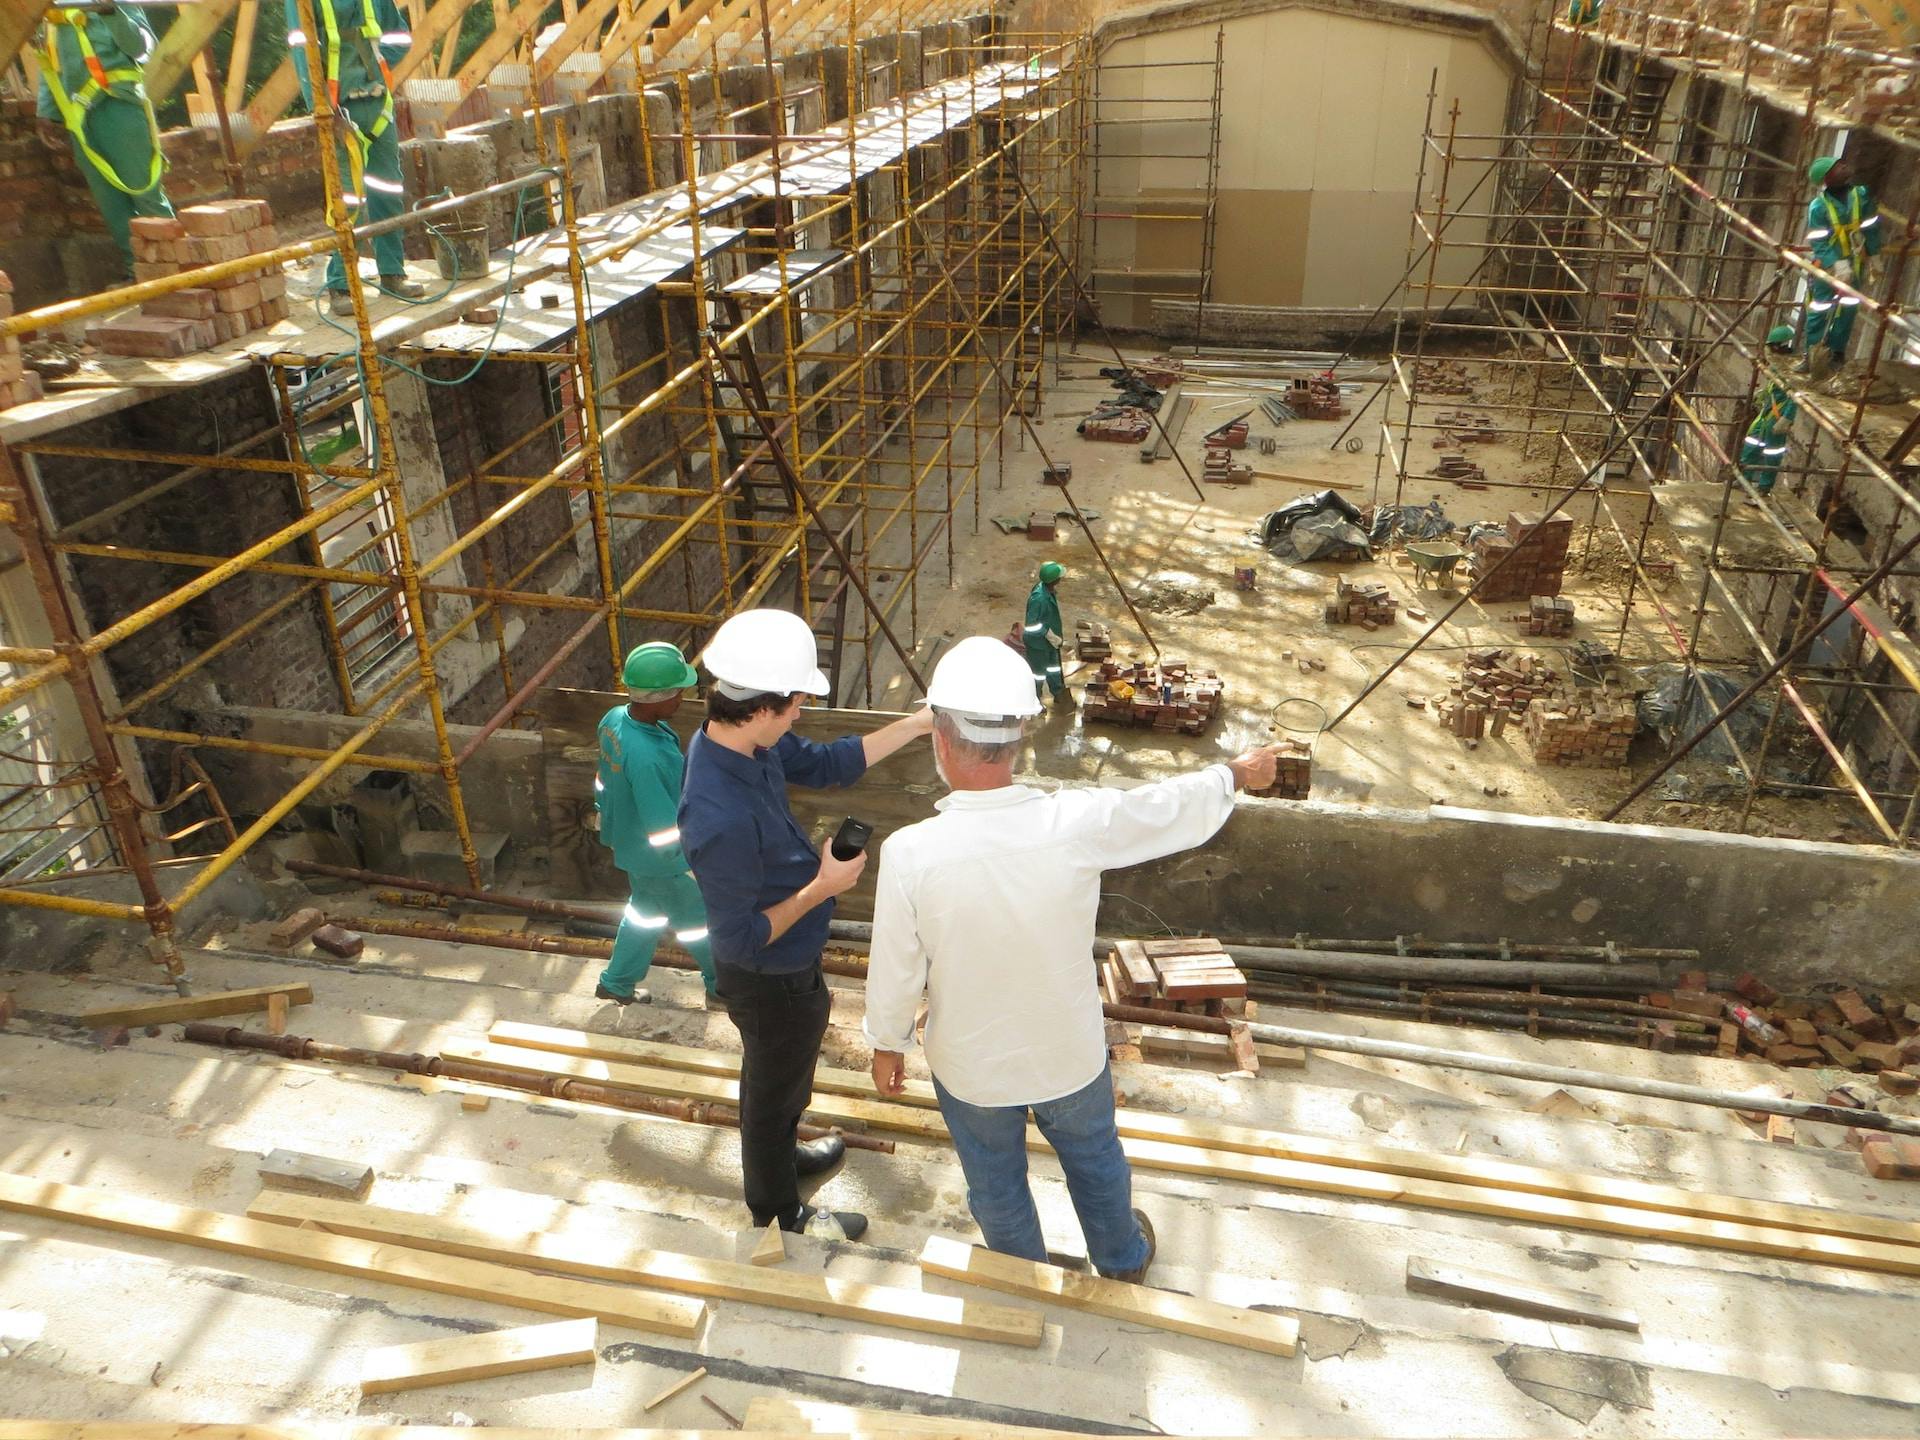 Construction workers wearing hard hats and reflective vests inside a vast building that is currently being constructed.